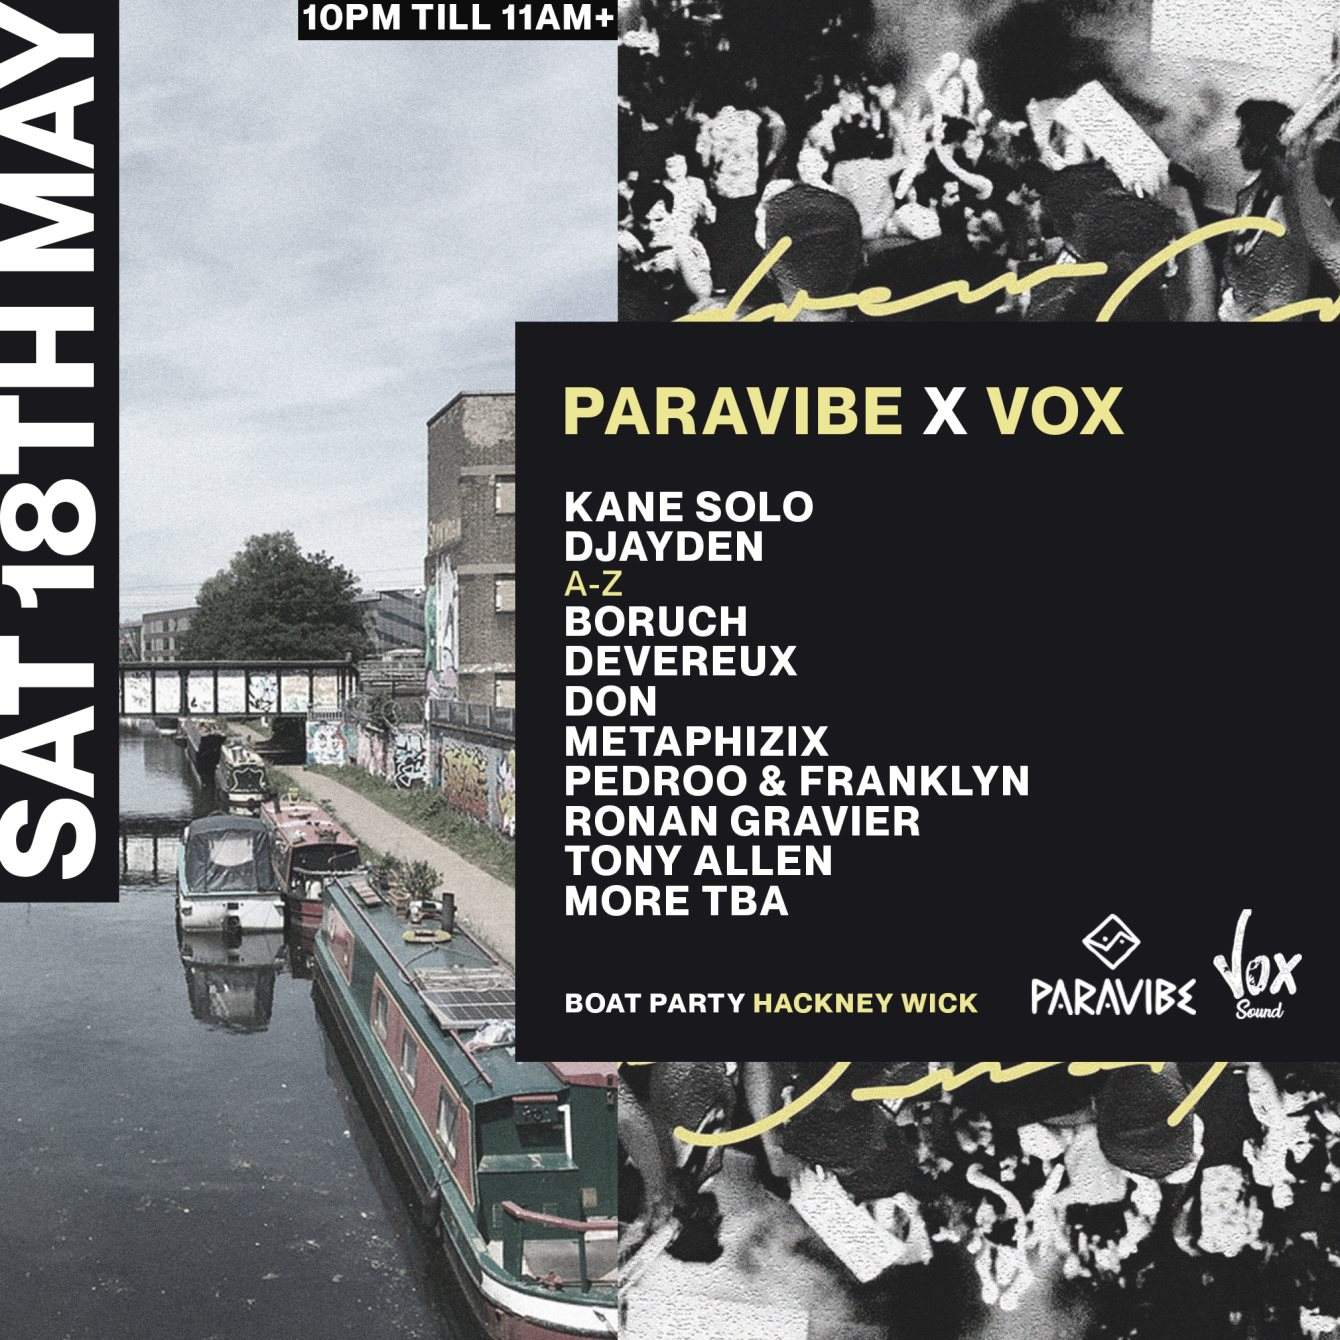 PARAVIBE X Vox Sound - Boat Party with Kane Solo & Friends - フライヤー裏